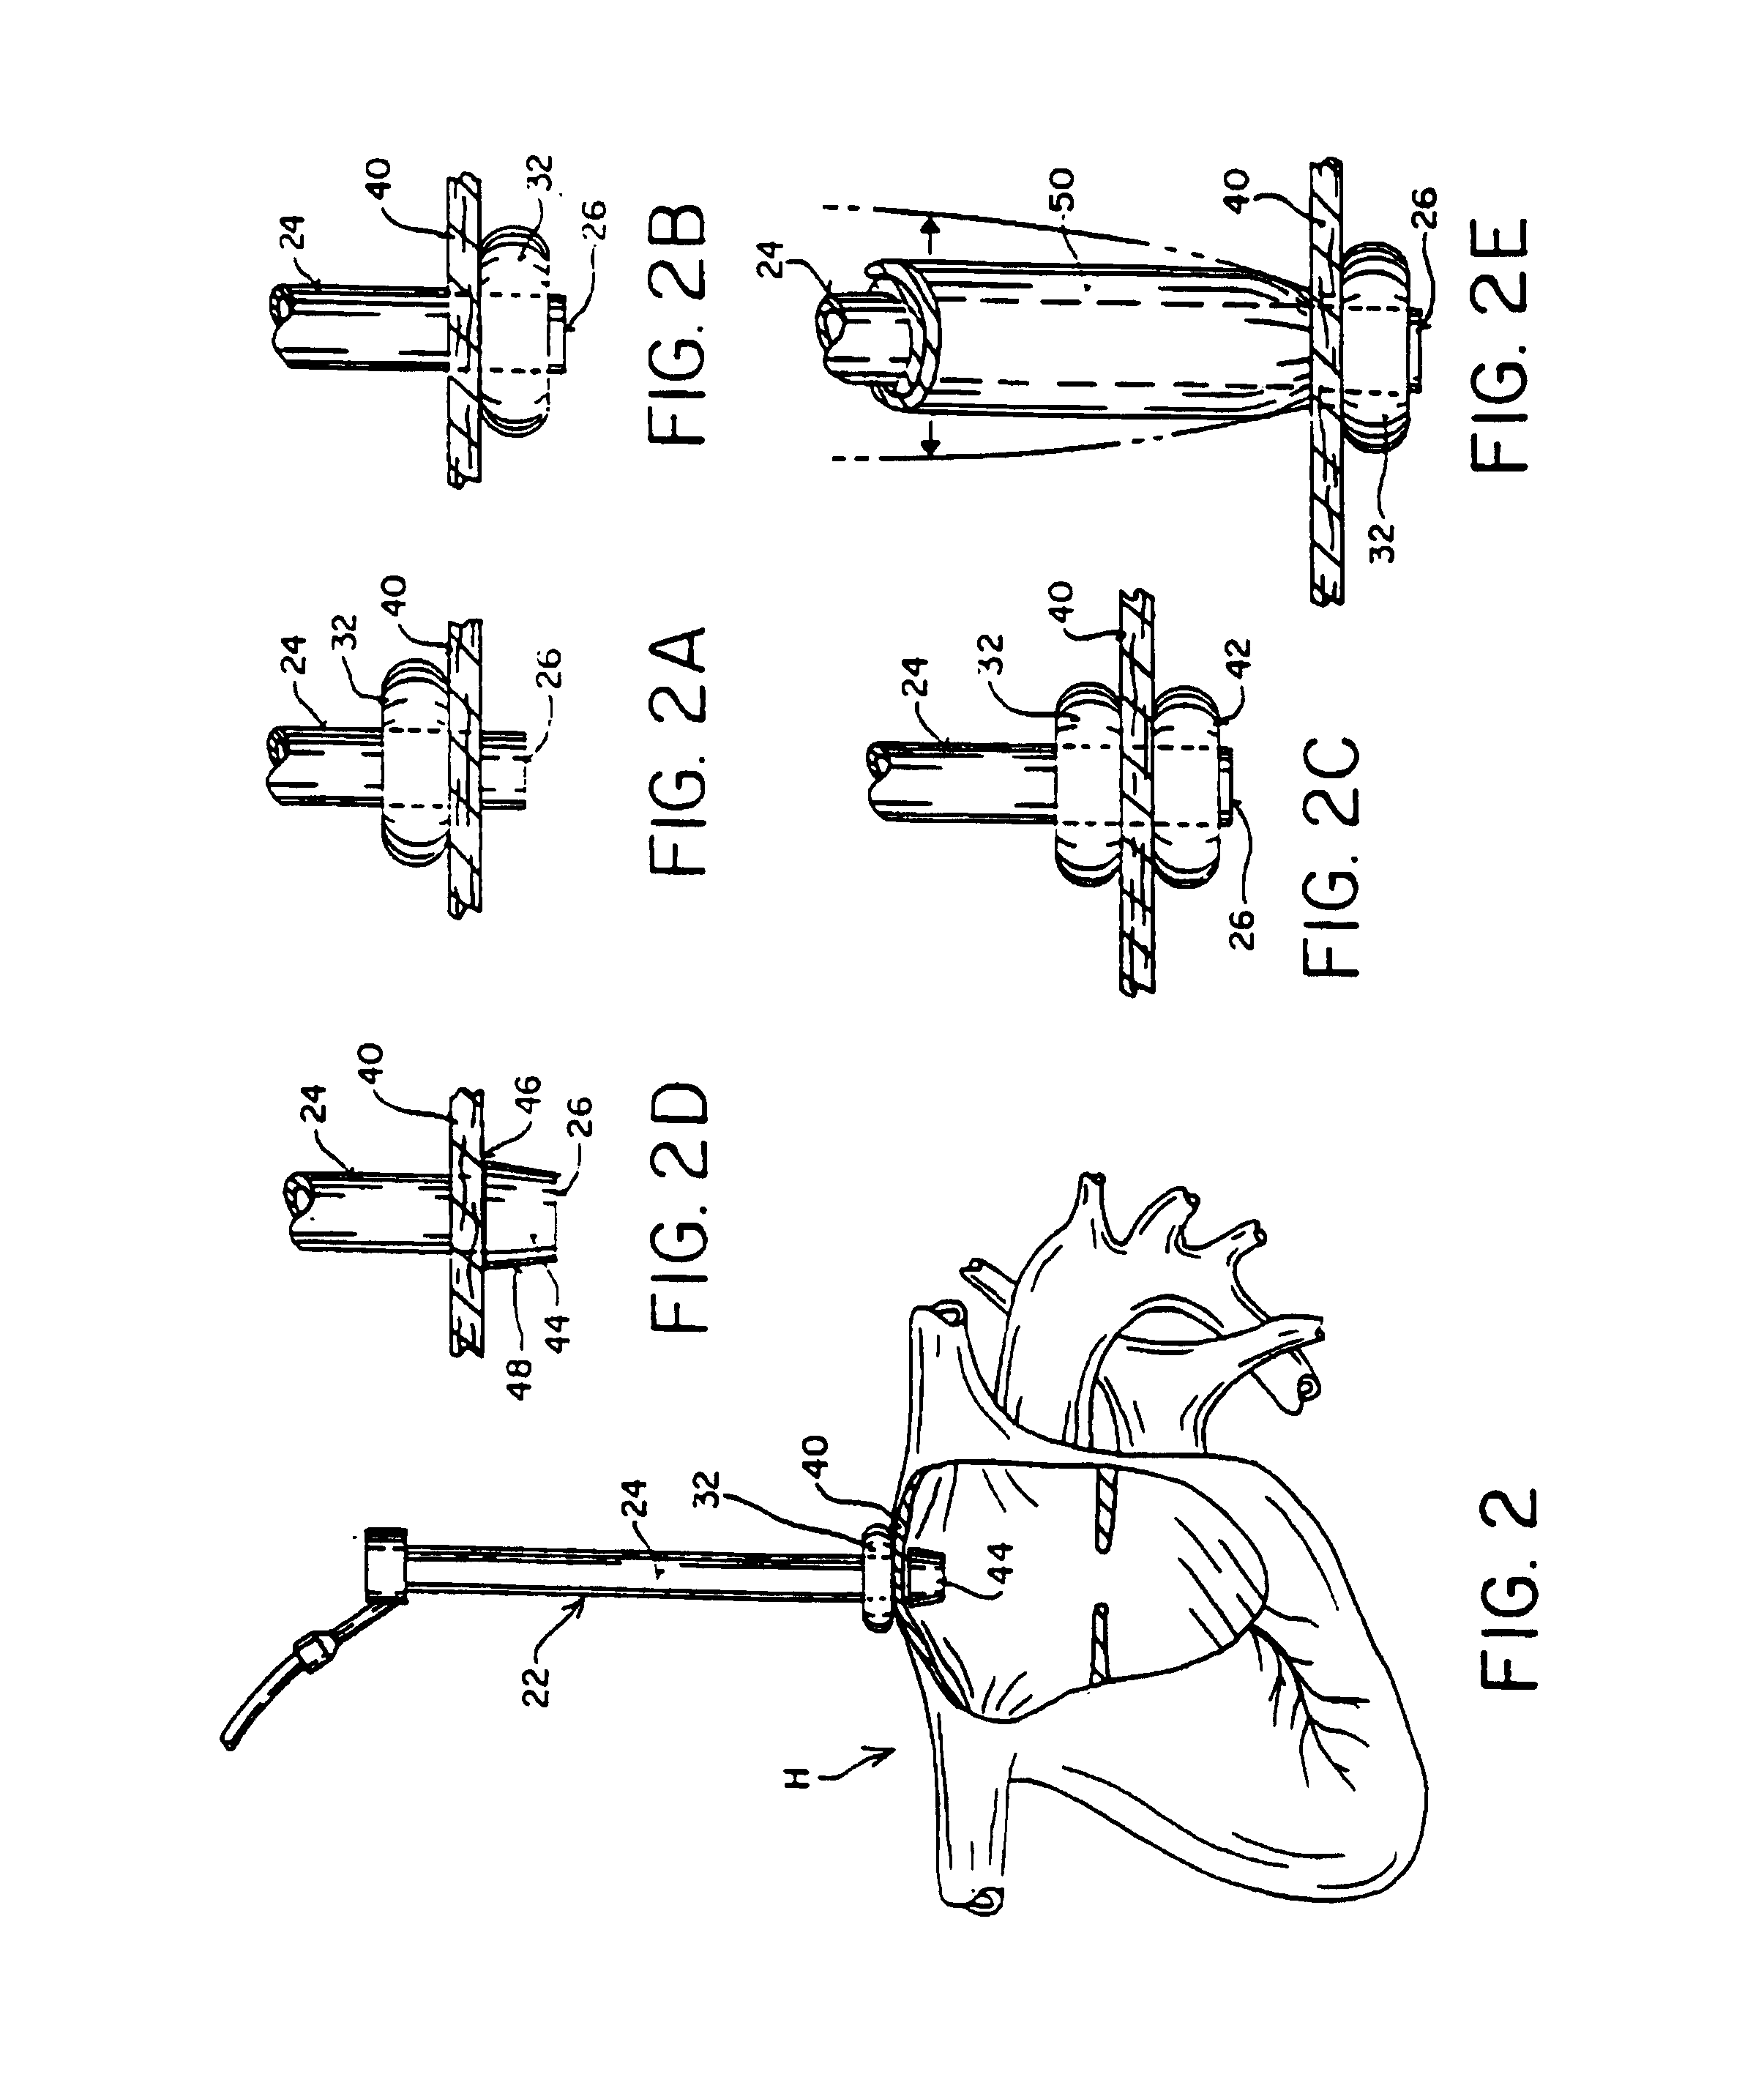 Method of Forming a Lesion in Heart Tissue